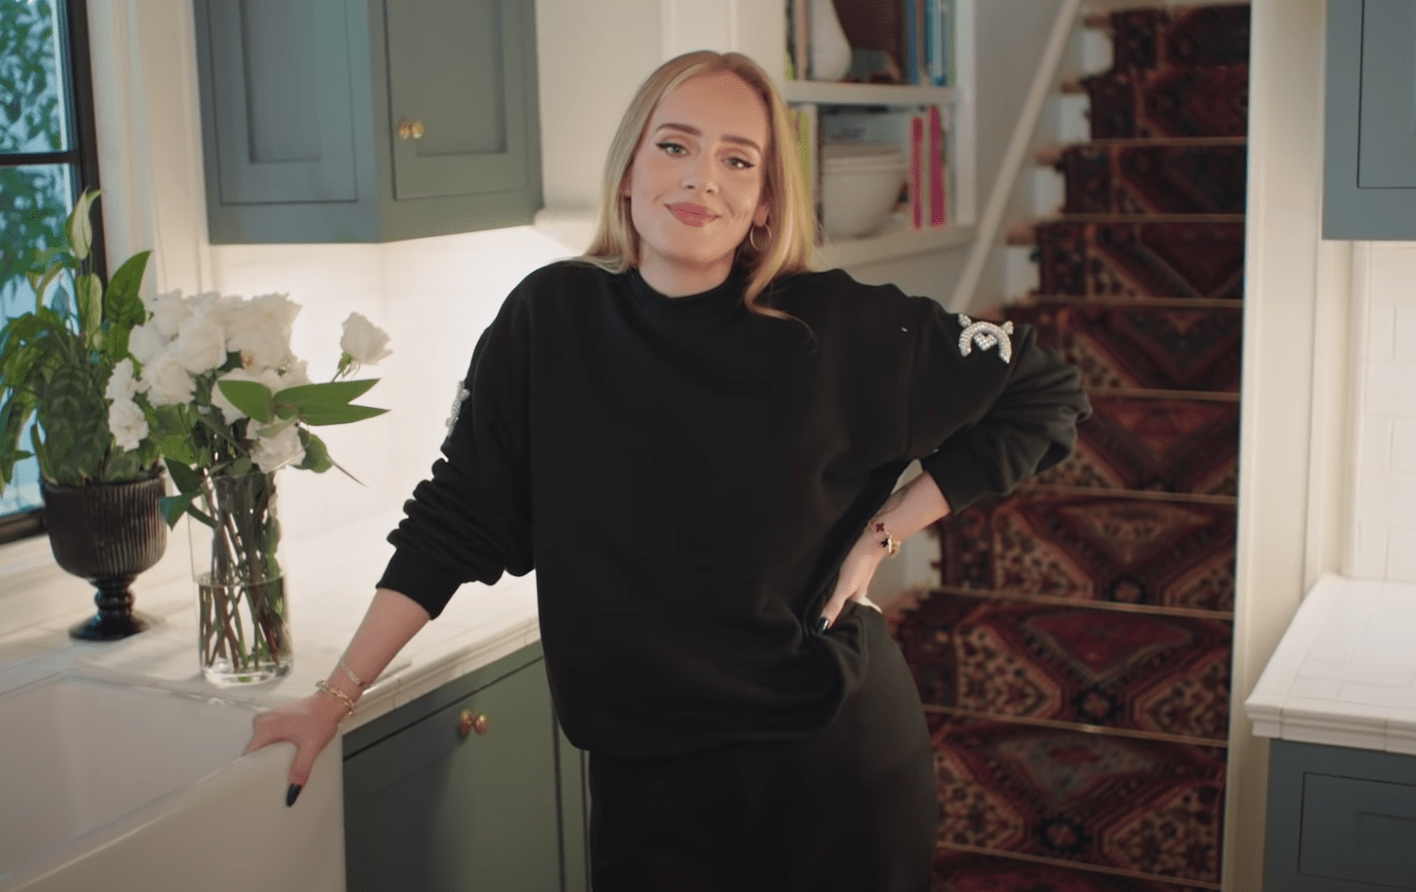 Adele reacts to criticism over her 100lb weight loss